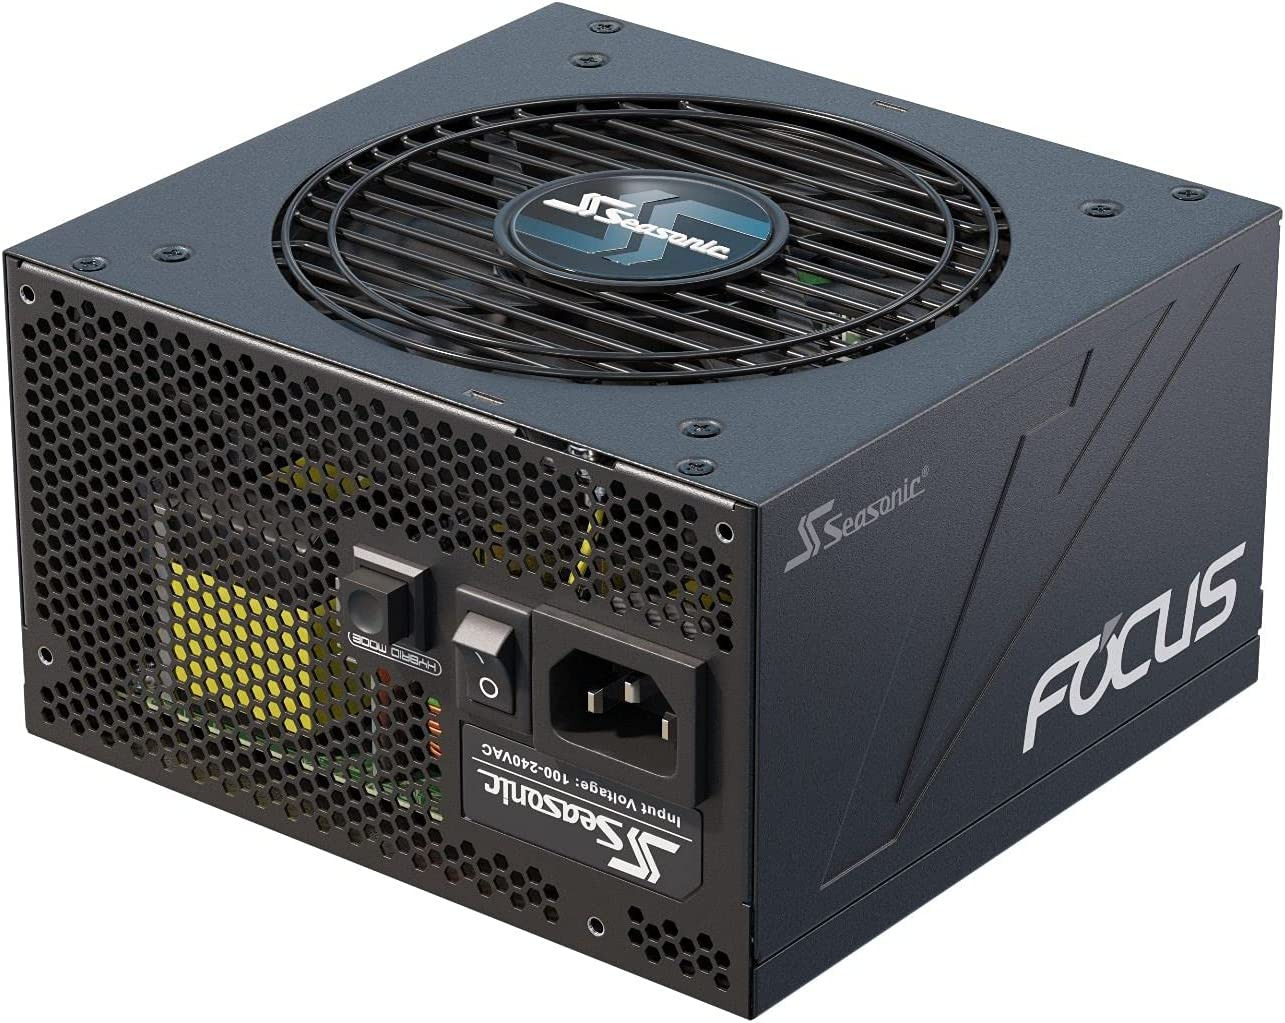 FOCUS GX-1000, 1000W 80+ Gold, Full-Modular, Fan Control in Fanless, Silent, and